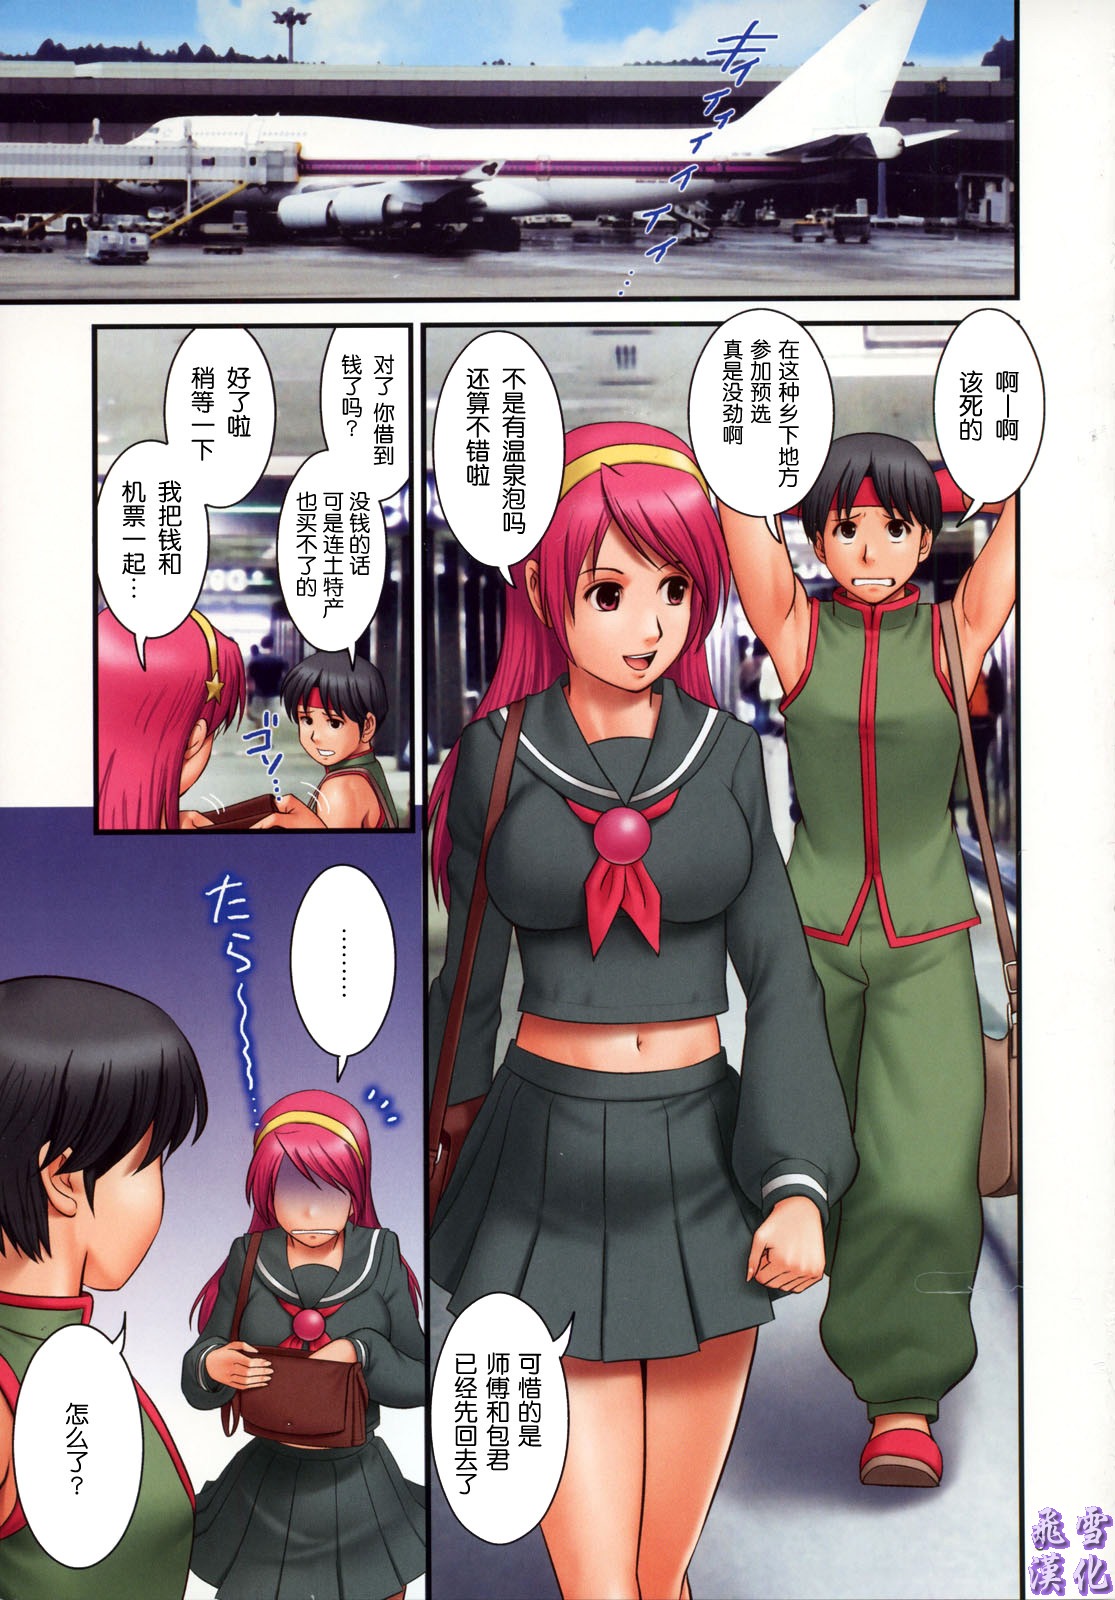 (C76) [Saigado] The Yuri &amp; Friends Fullcolor 10 (King of Fighters) [Chinese] (同人誌) [彩画堂] THE YURI  FRIENDS FULLCOLOR 10 (KOF) [飞雪汉化组]